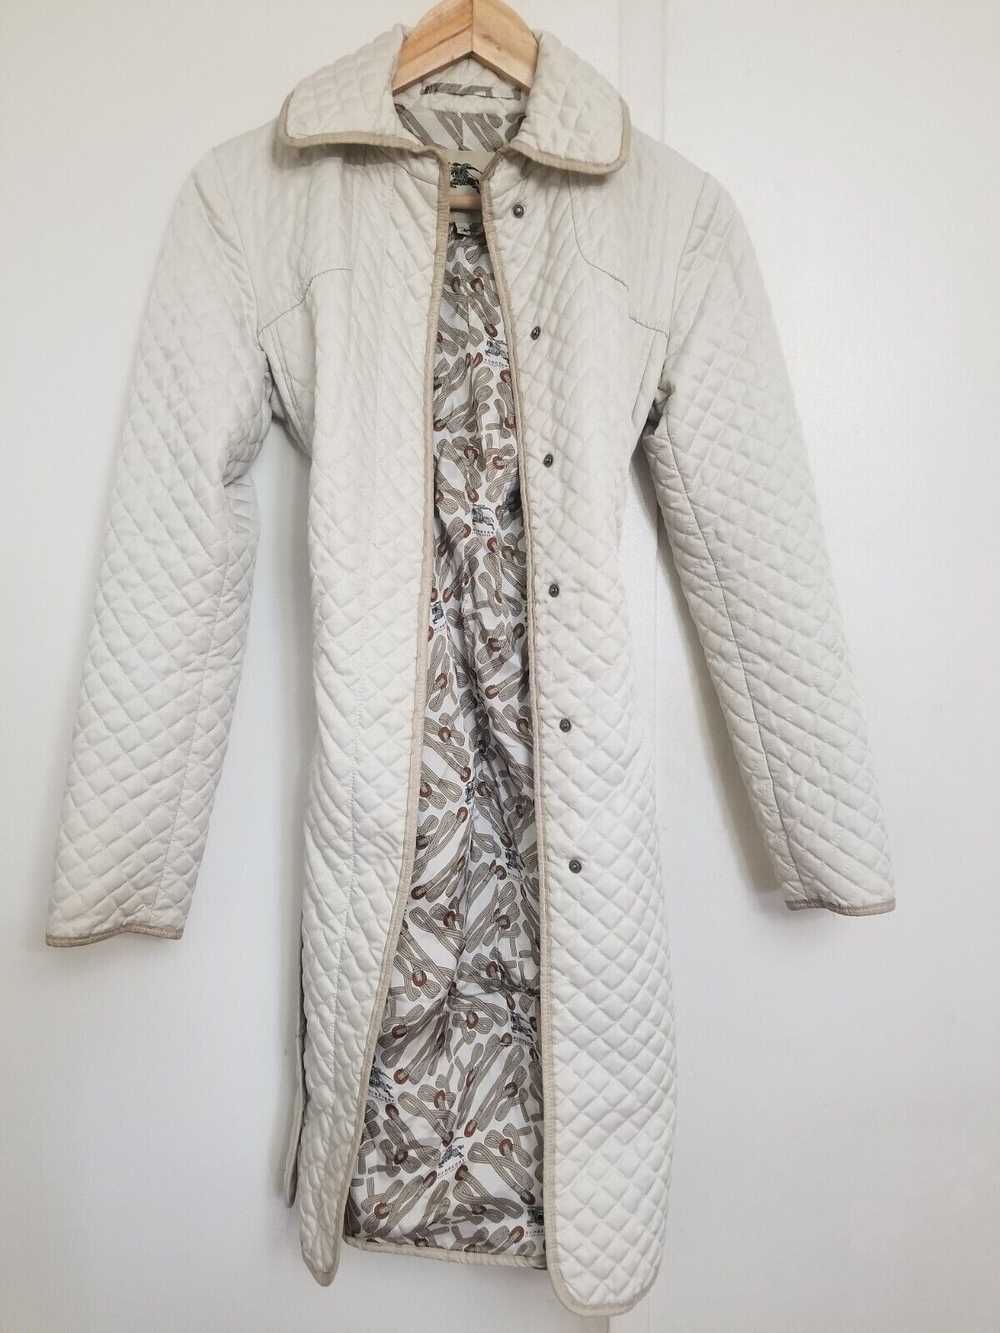 Burberry BURBERRY LONDON QUILTED IVORY JACKET - image 5